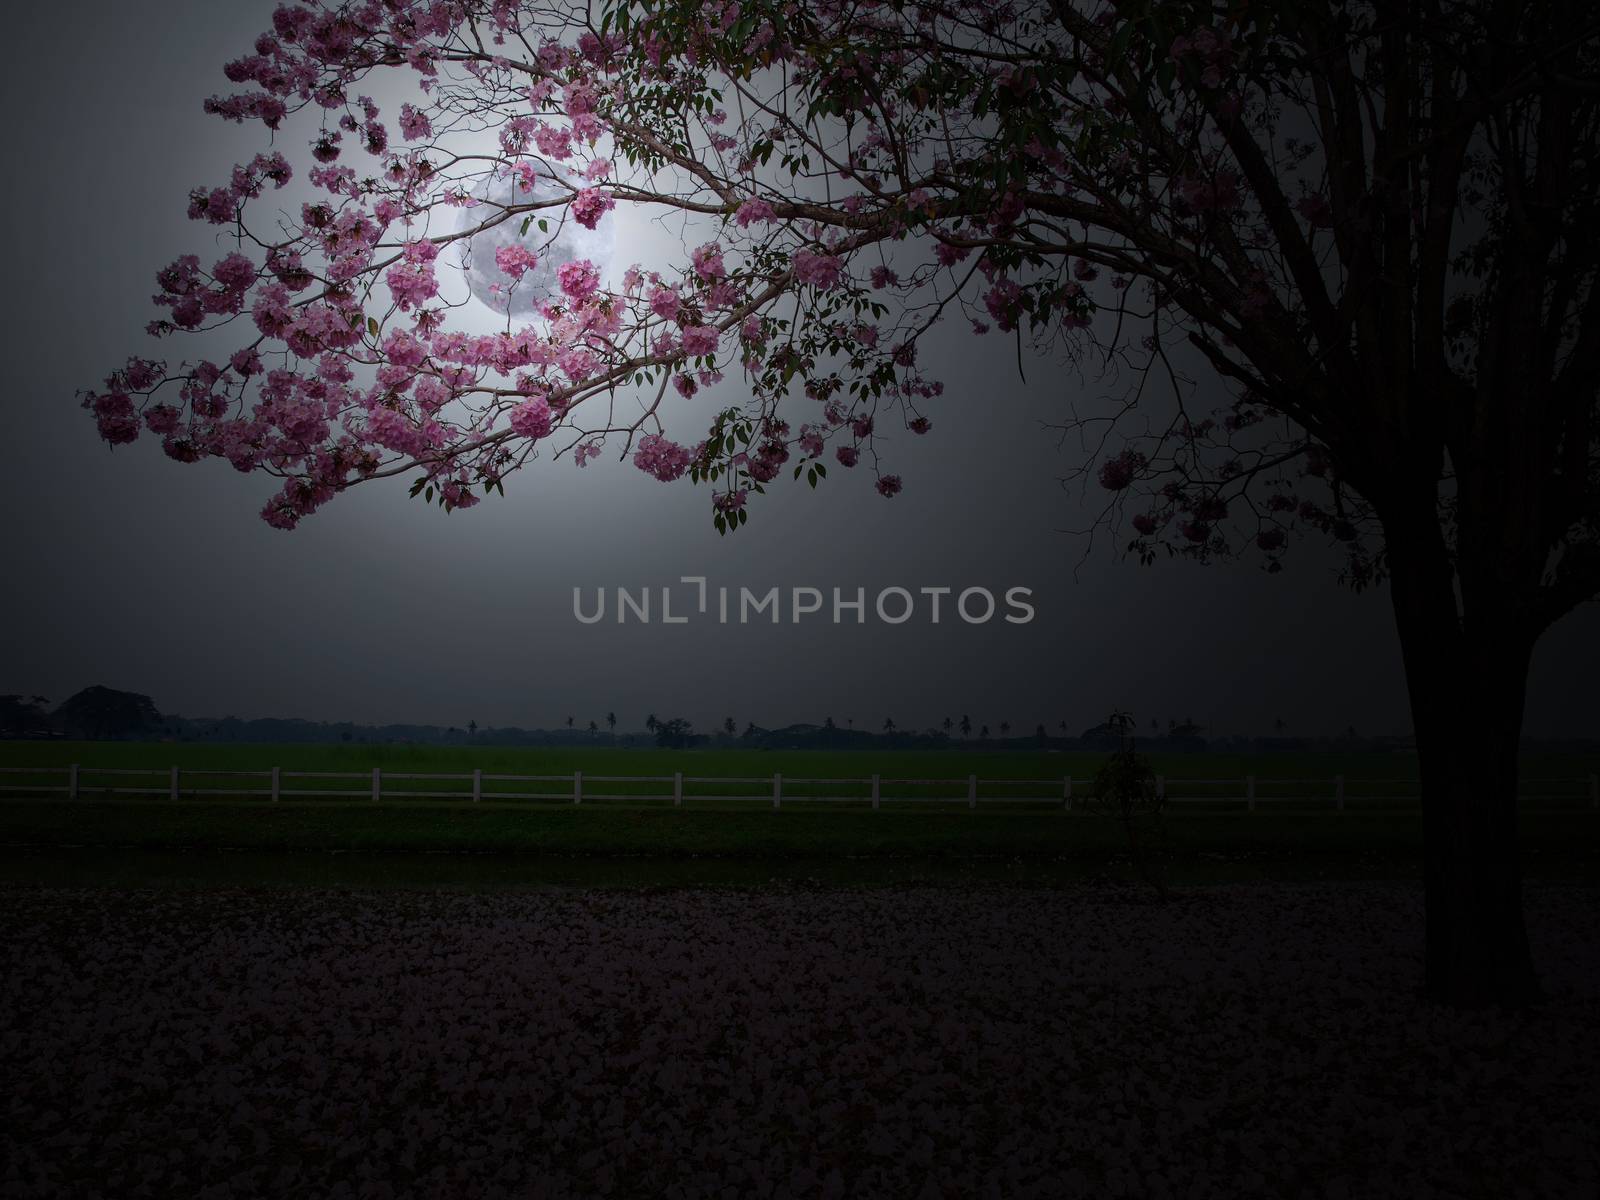 Full moon behind branch of pink trumpet tree flower(Tabebuia rosea) in countryside with farmland on backside.